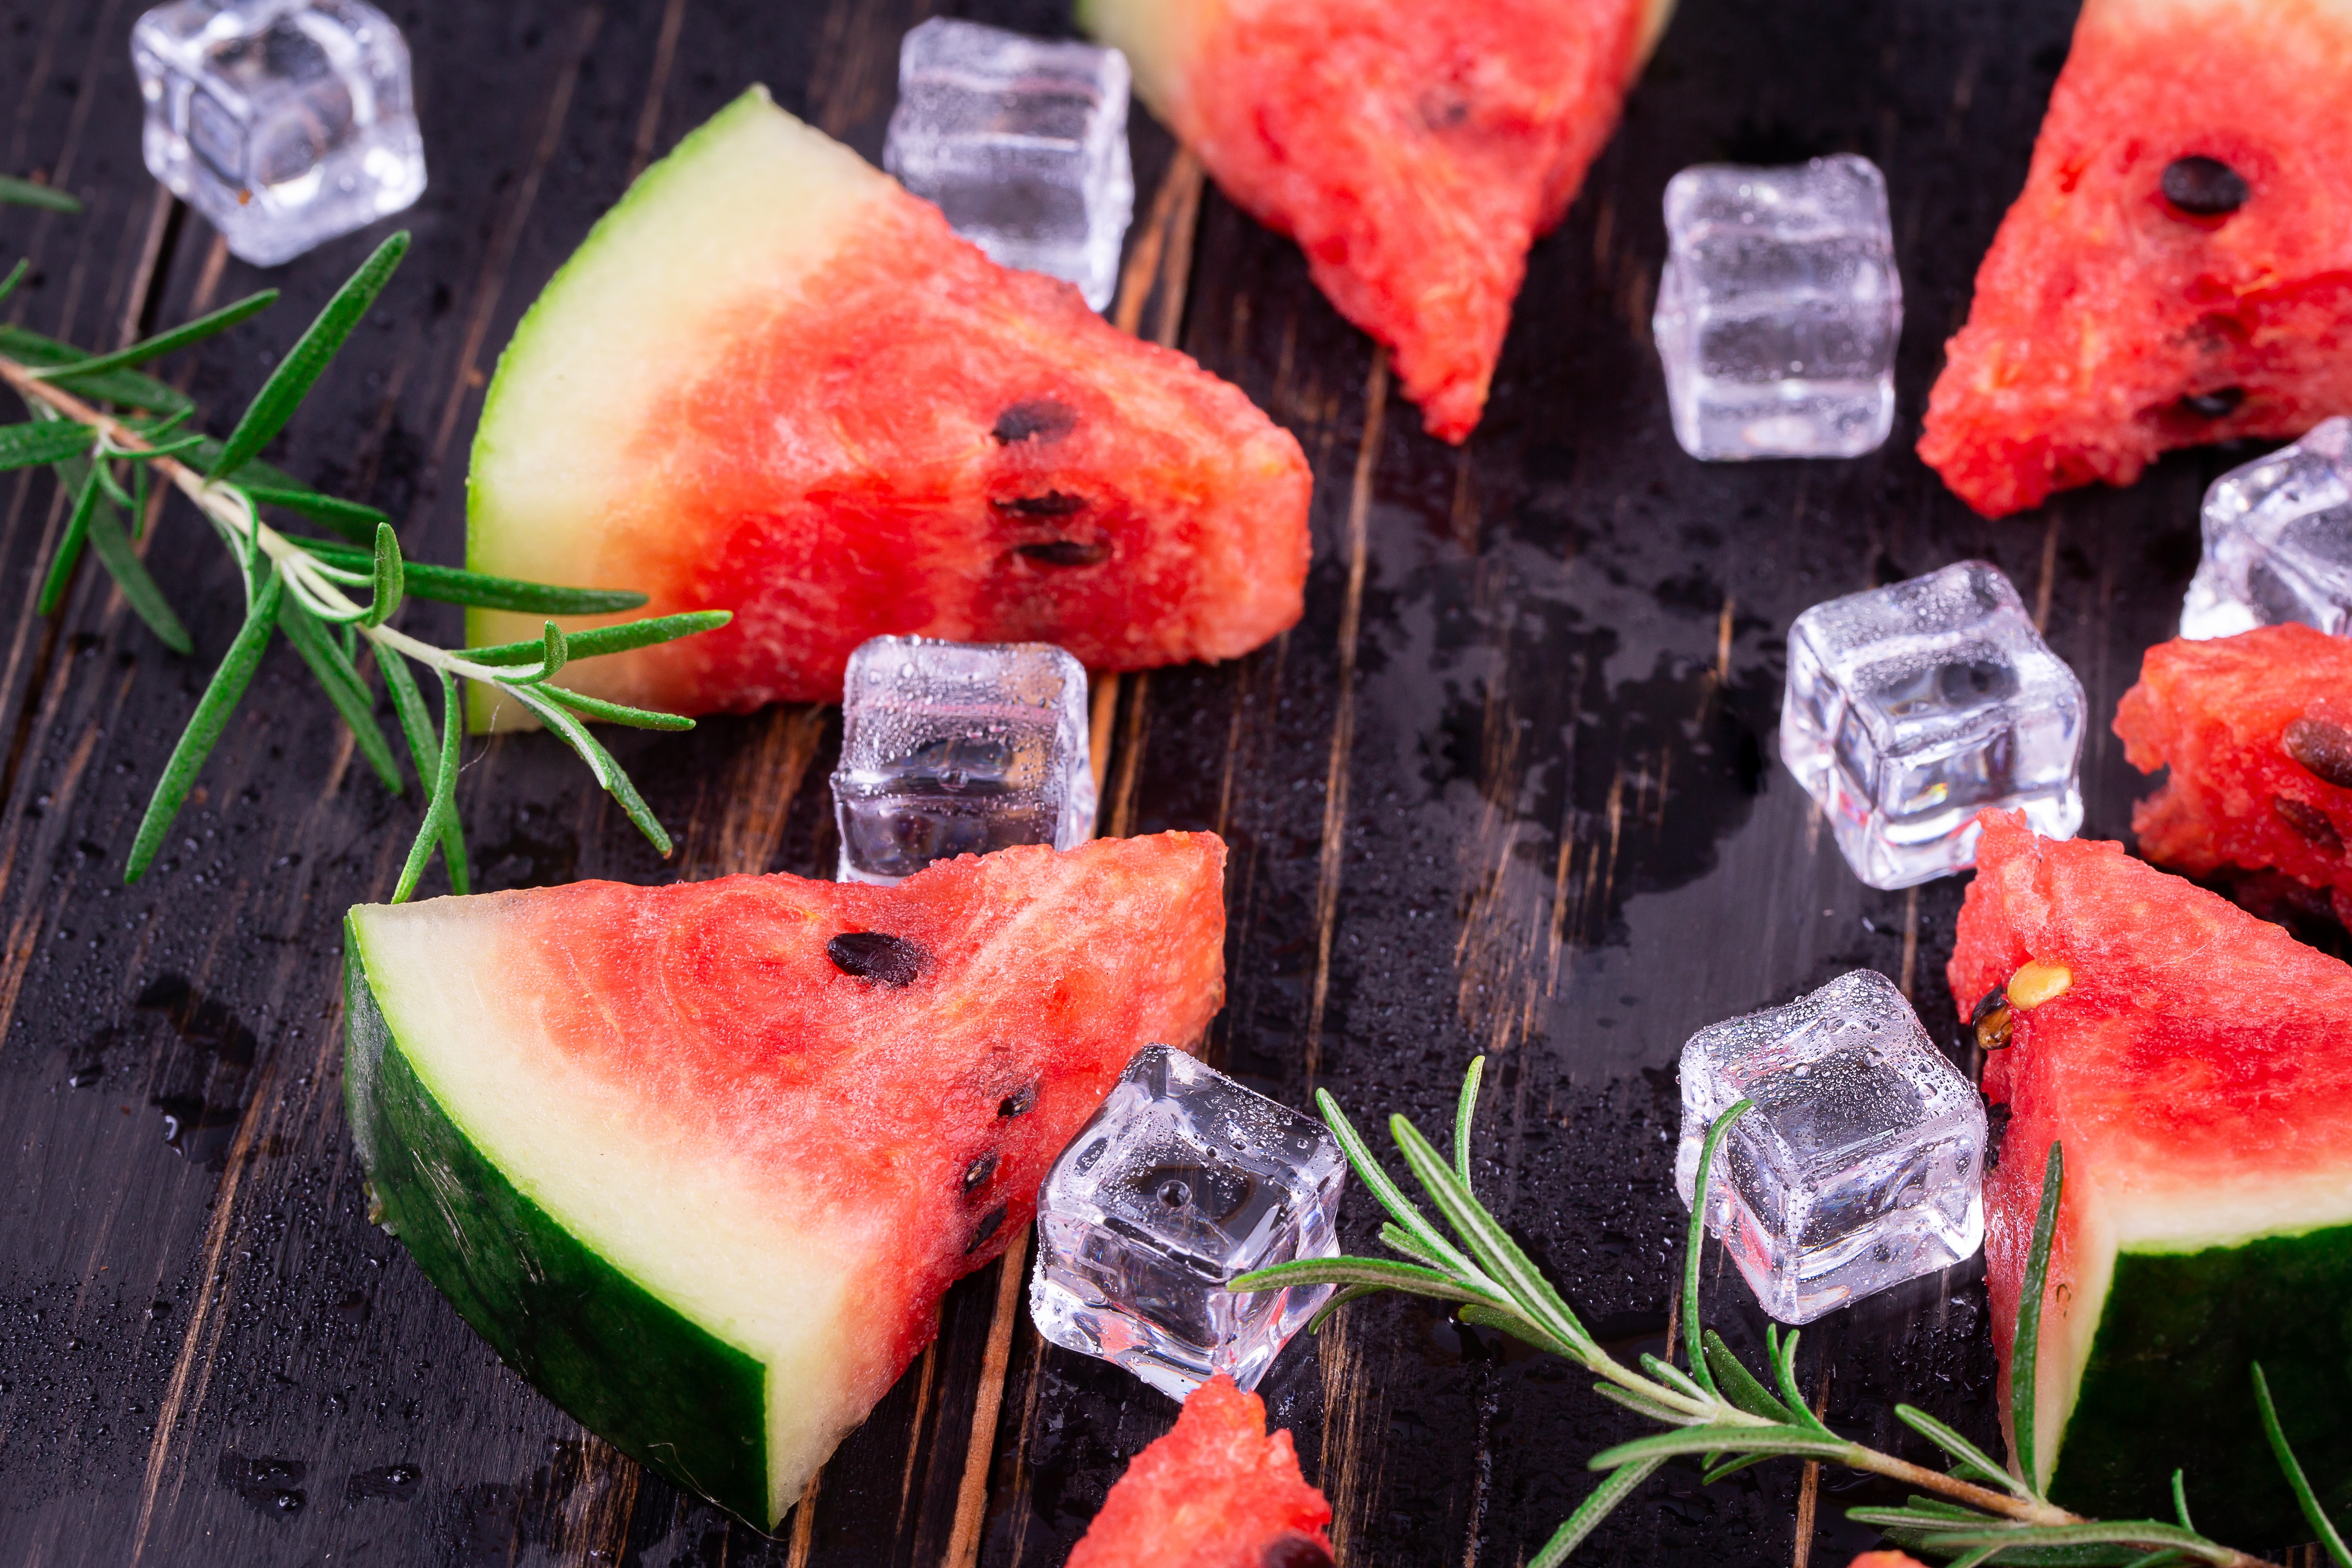 Watermelon slices with ice cubes on the table